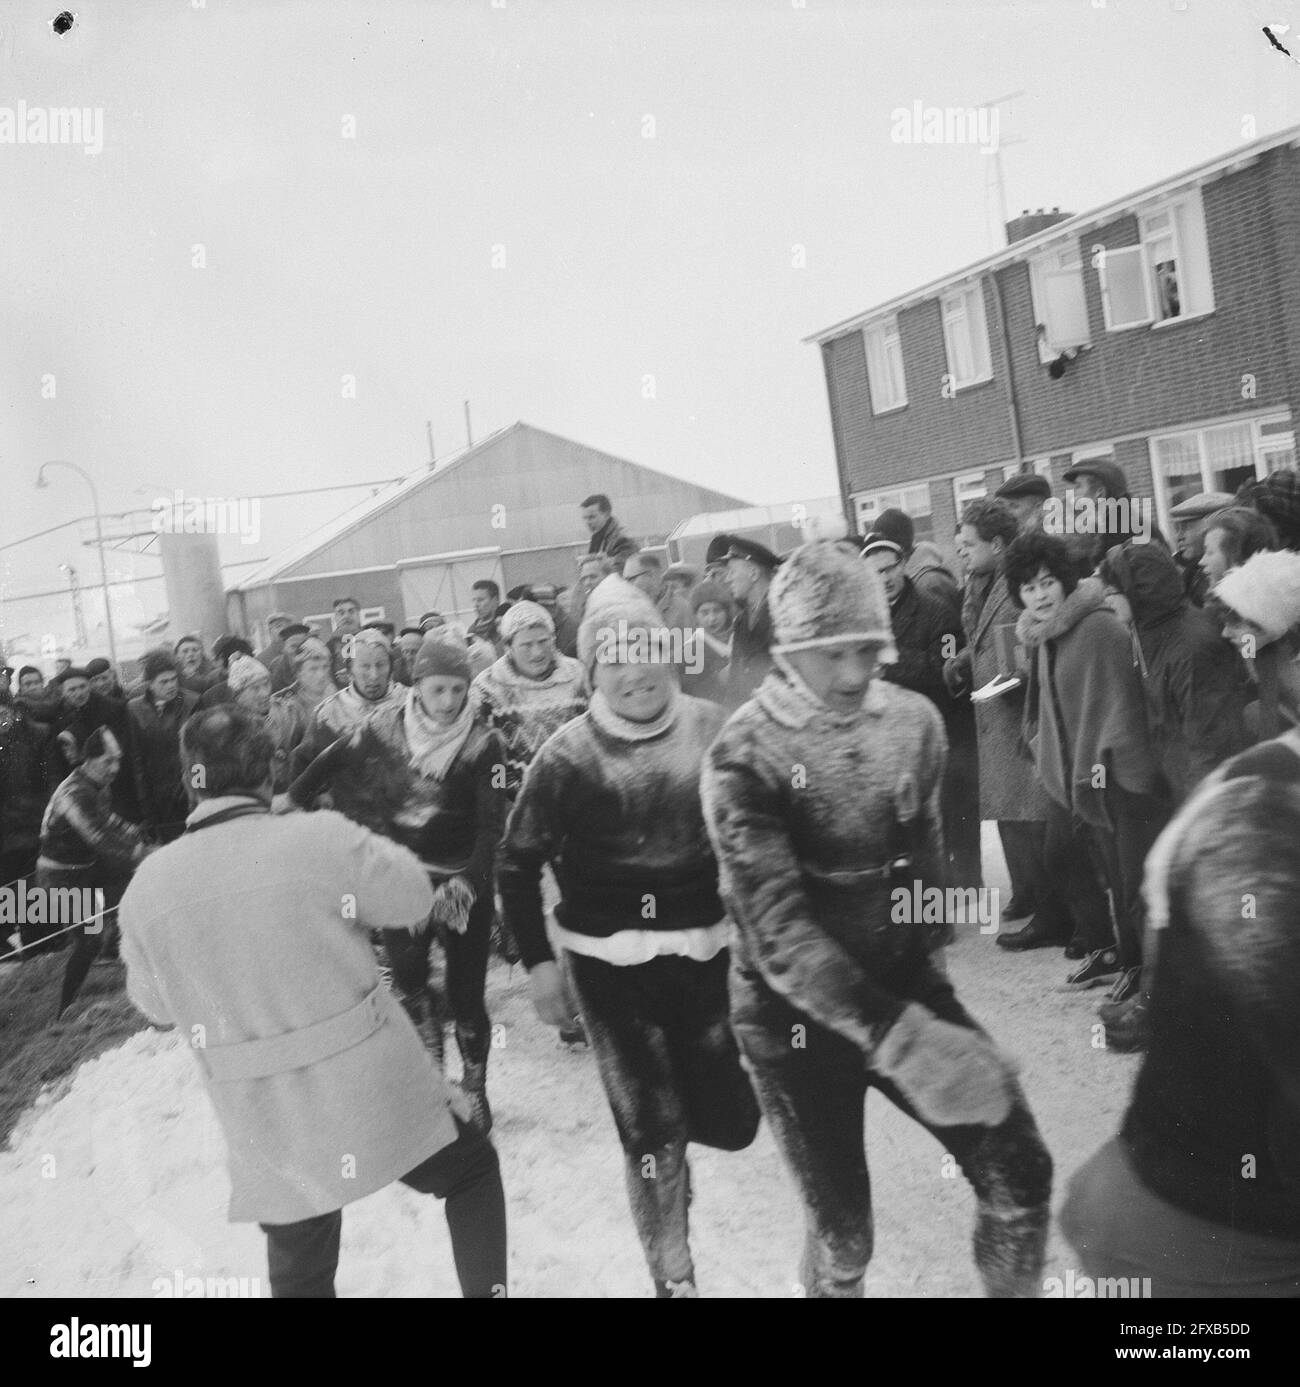 Elfstedentocht 1963. The leading group at klunen in Workum, January 18, 1963, skating, sport, The Netherlands, 20th century press agency photo, news to remember, documentary, historic photography 1945-1990, visual stories, human history of the Twentieth Century, capturing moments in time Stock Photo